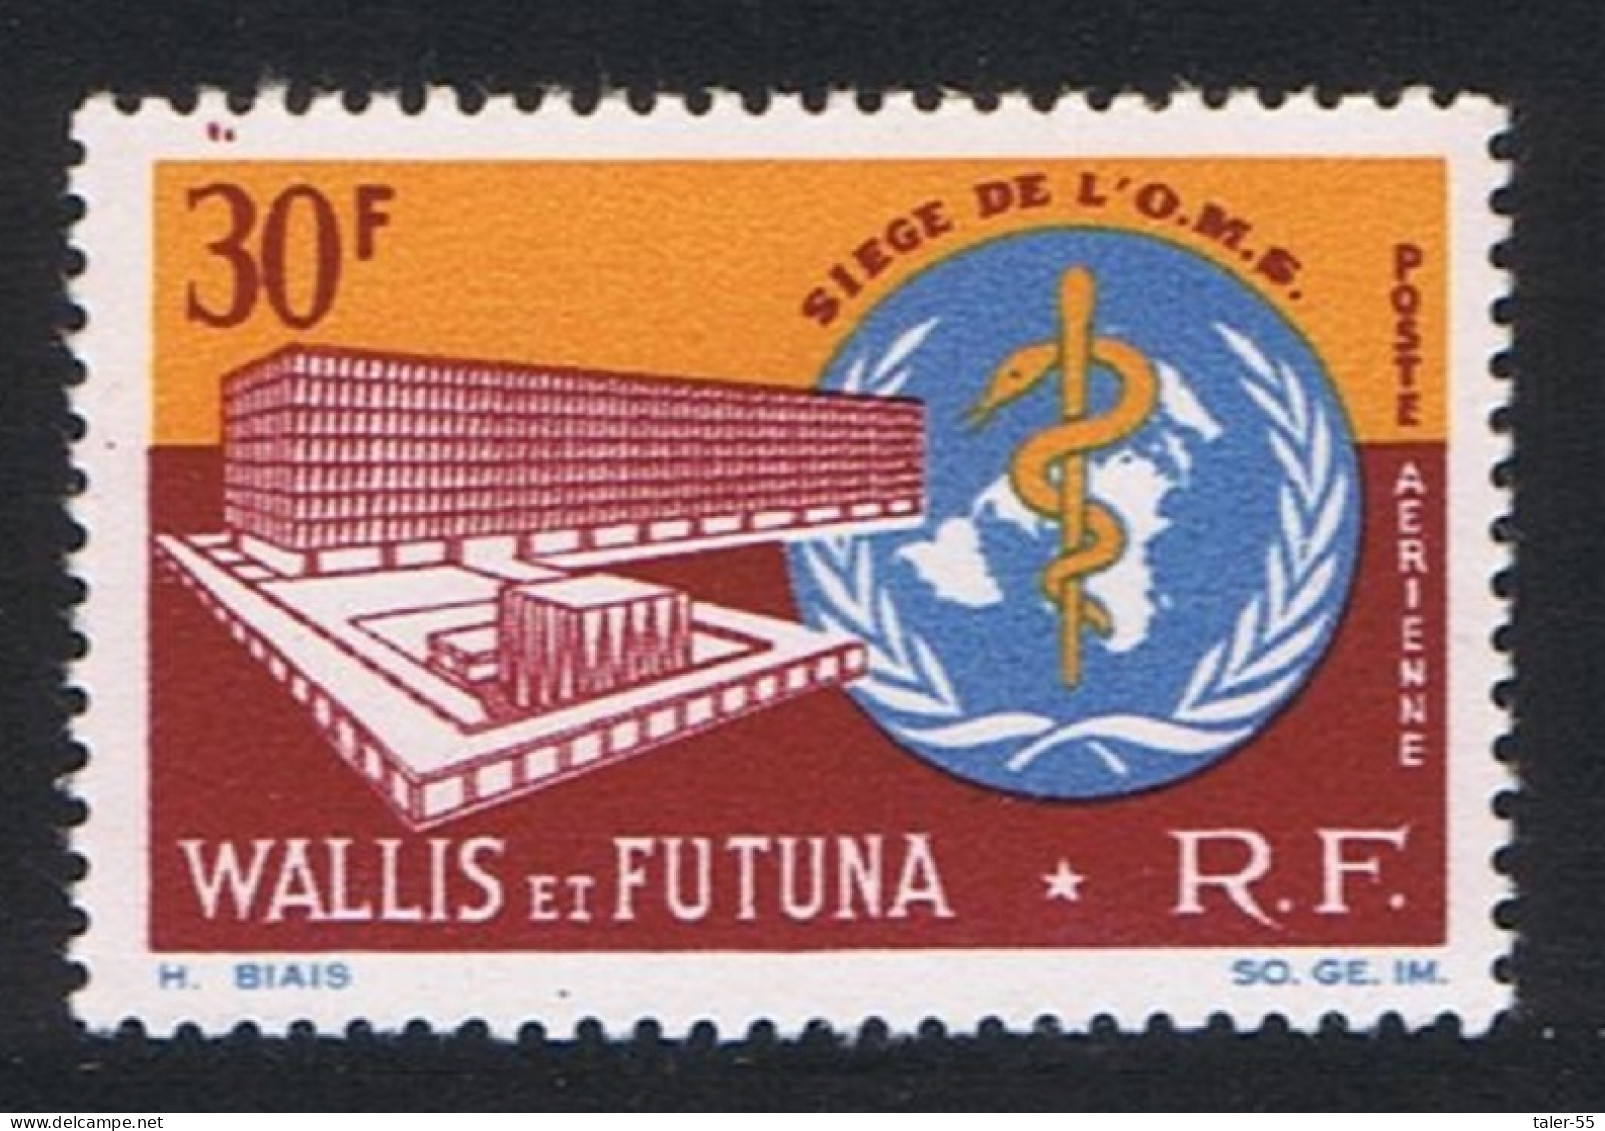 Wallis And Futuna Inauguration Of WHO Headquarters Airmail Def 1966 SG#191 Sc#C25 - Used Stamps